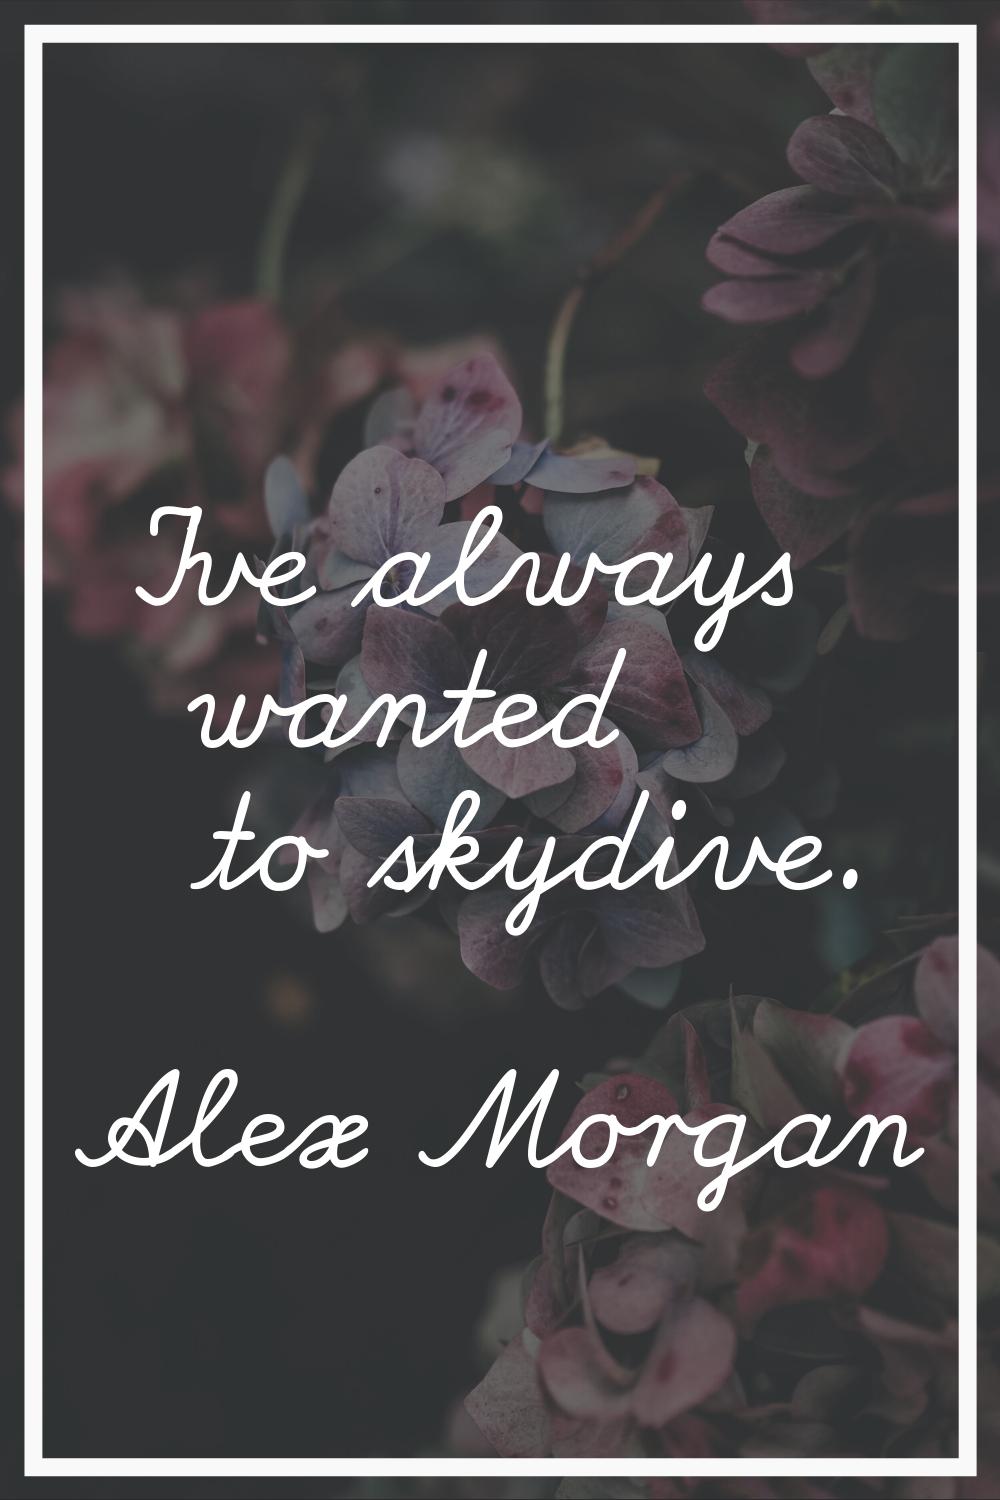 I've always wanted to skydive.